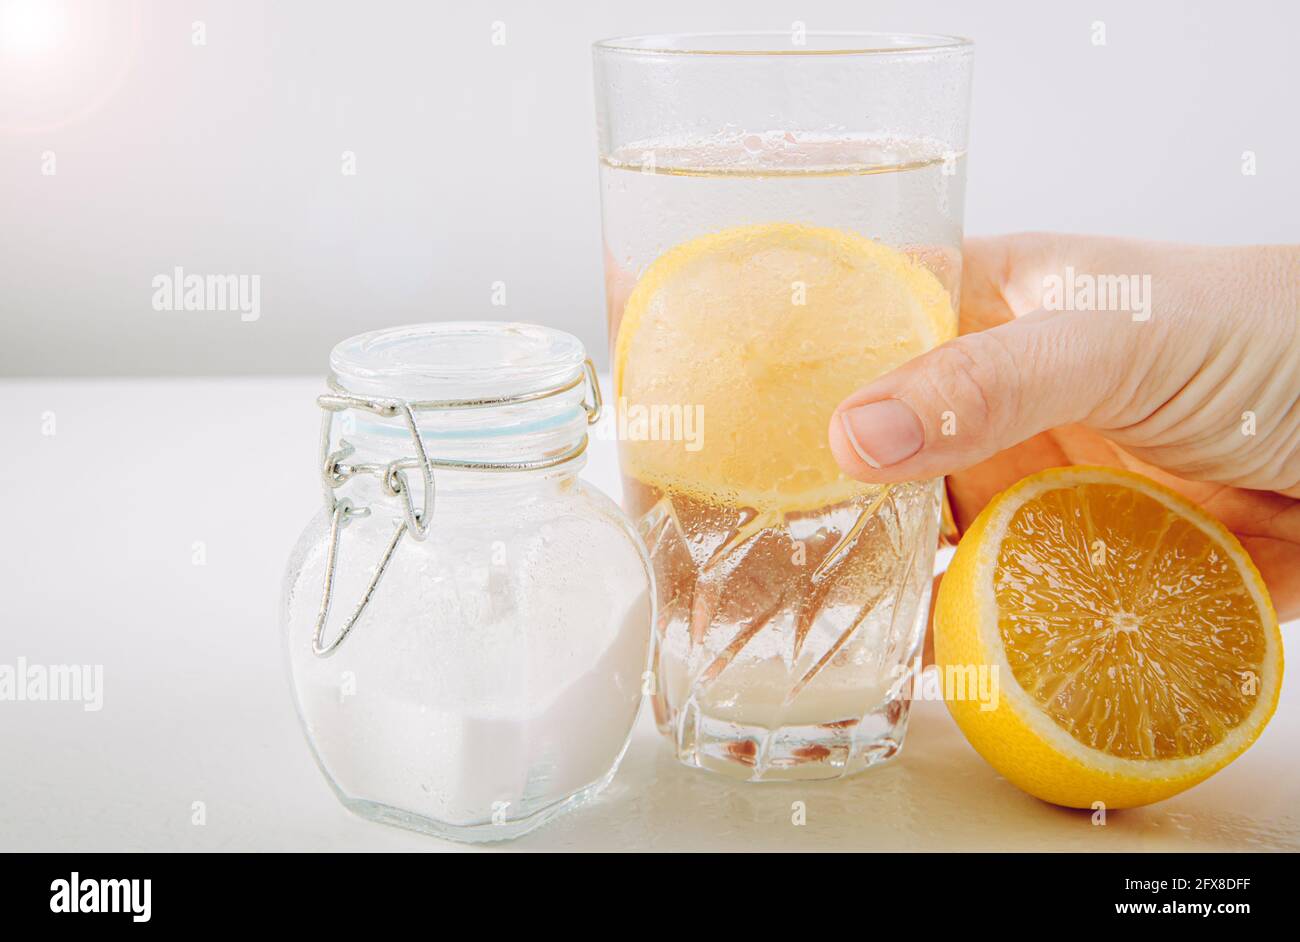 Hand holding drinking glass with baking soda, water and lemon juice infusion, health benefits for digestive system concept. Minimal white background. Stock Photo